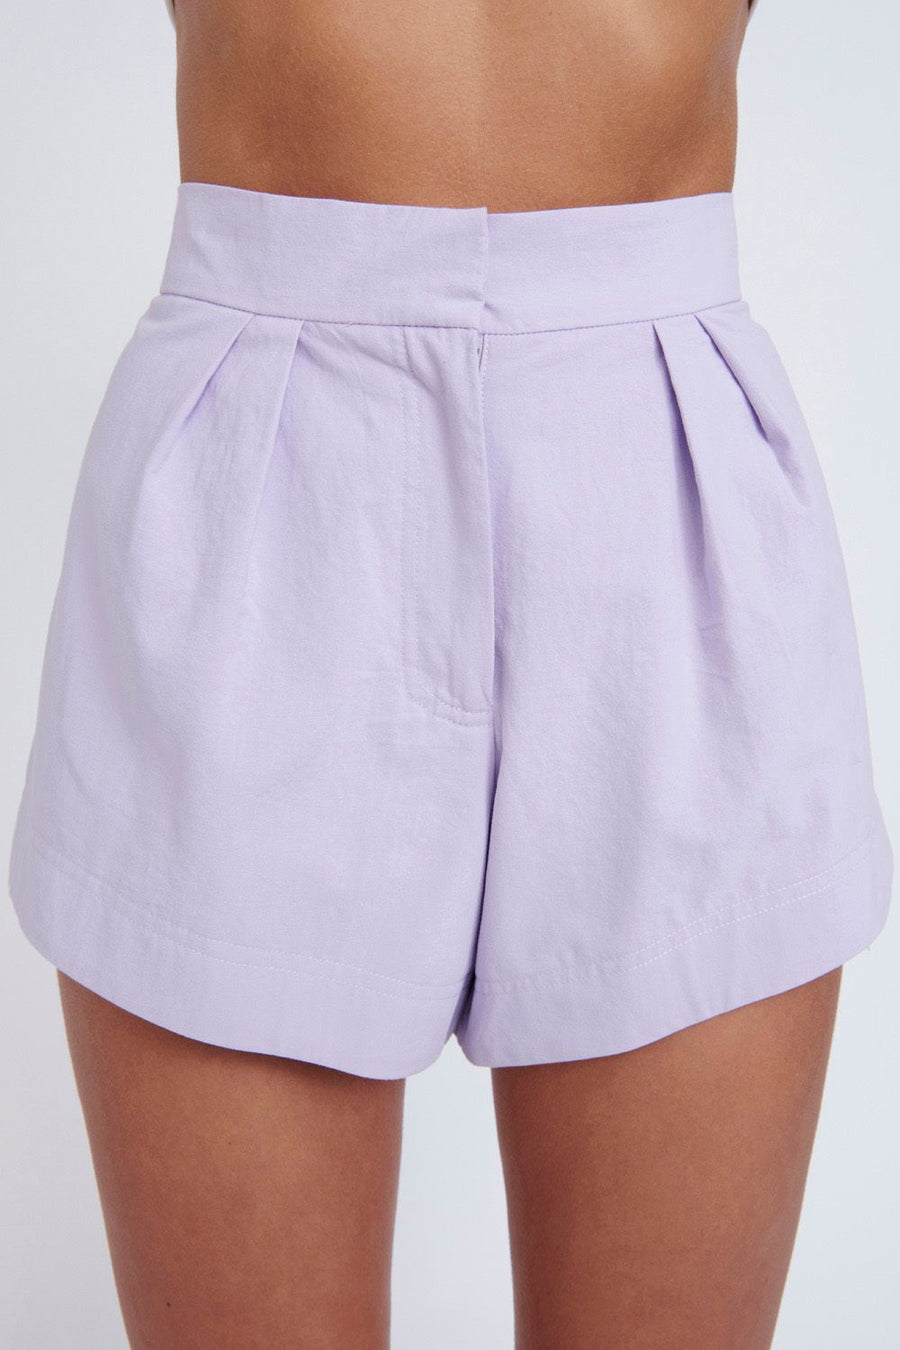 By Johnny.  St. Louis Short - Lilac FINAL SALE